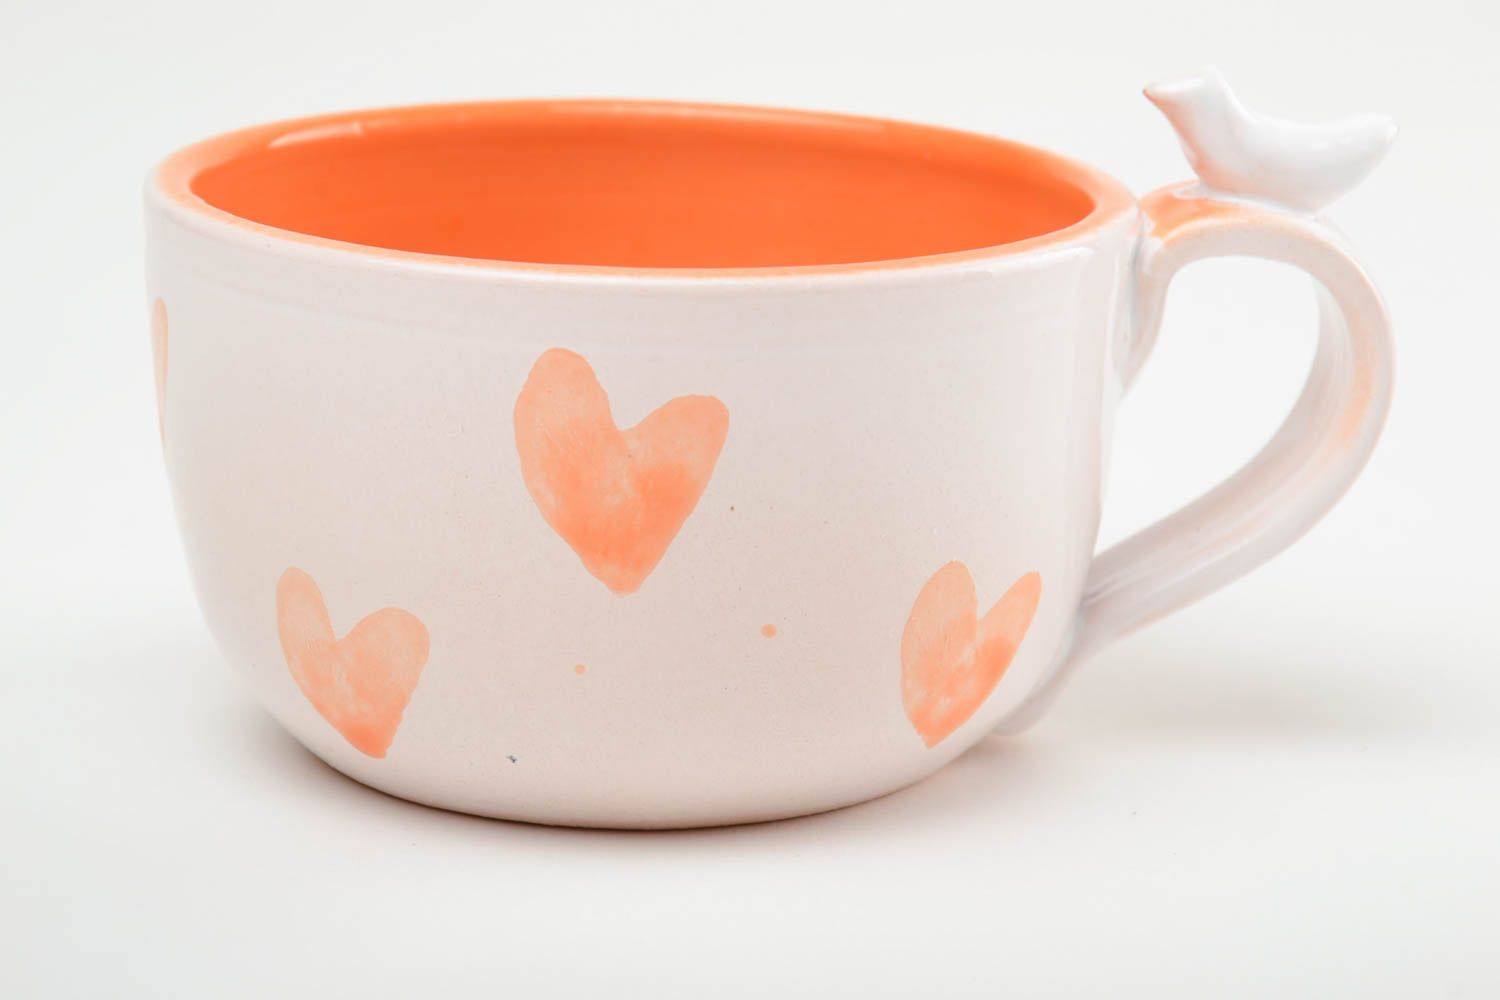 8 oz orange and white glazed ceramic teacup with a bird on handle and heart pattern photo 3